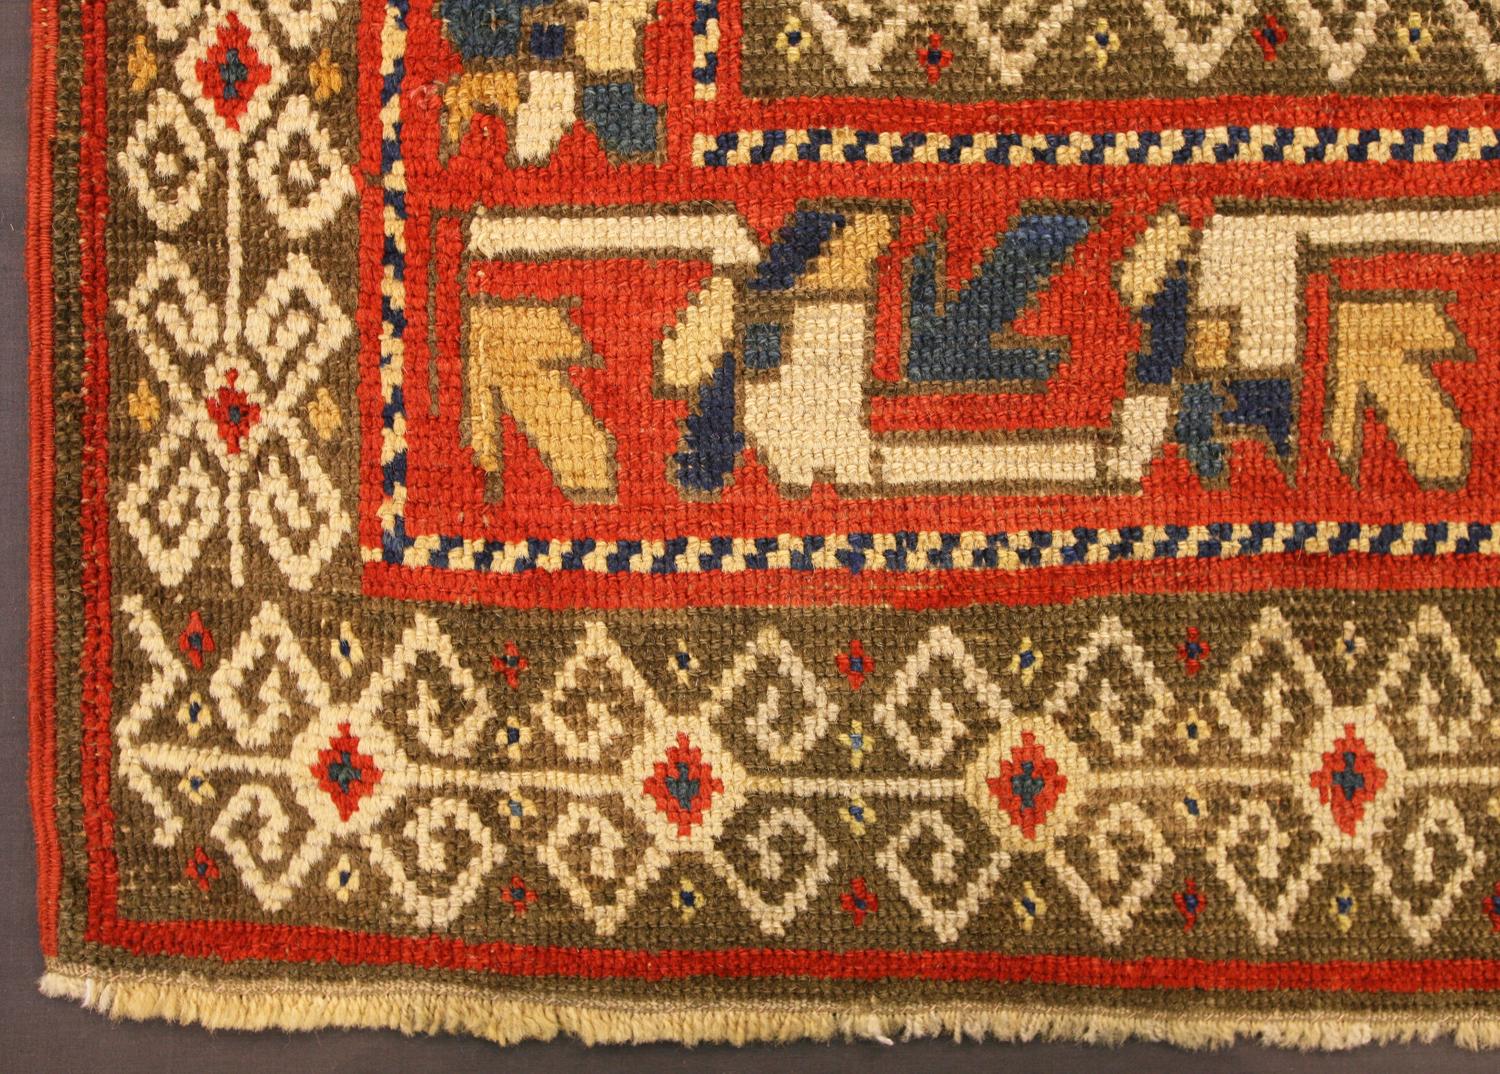 This is an antique Ganja rug woven in the central part of the Caucasus mountains during the end of the 19th century. It has a traditional Ganja design with diagonal strips with repeating hooked boxes within them. The border designs in this rug are